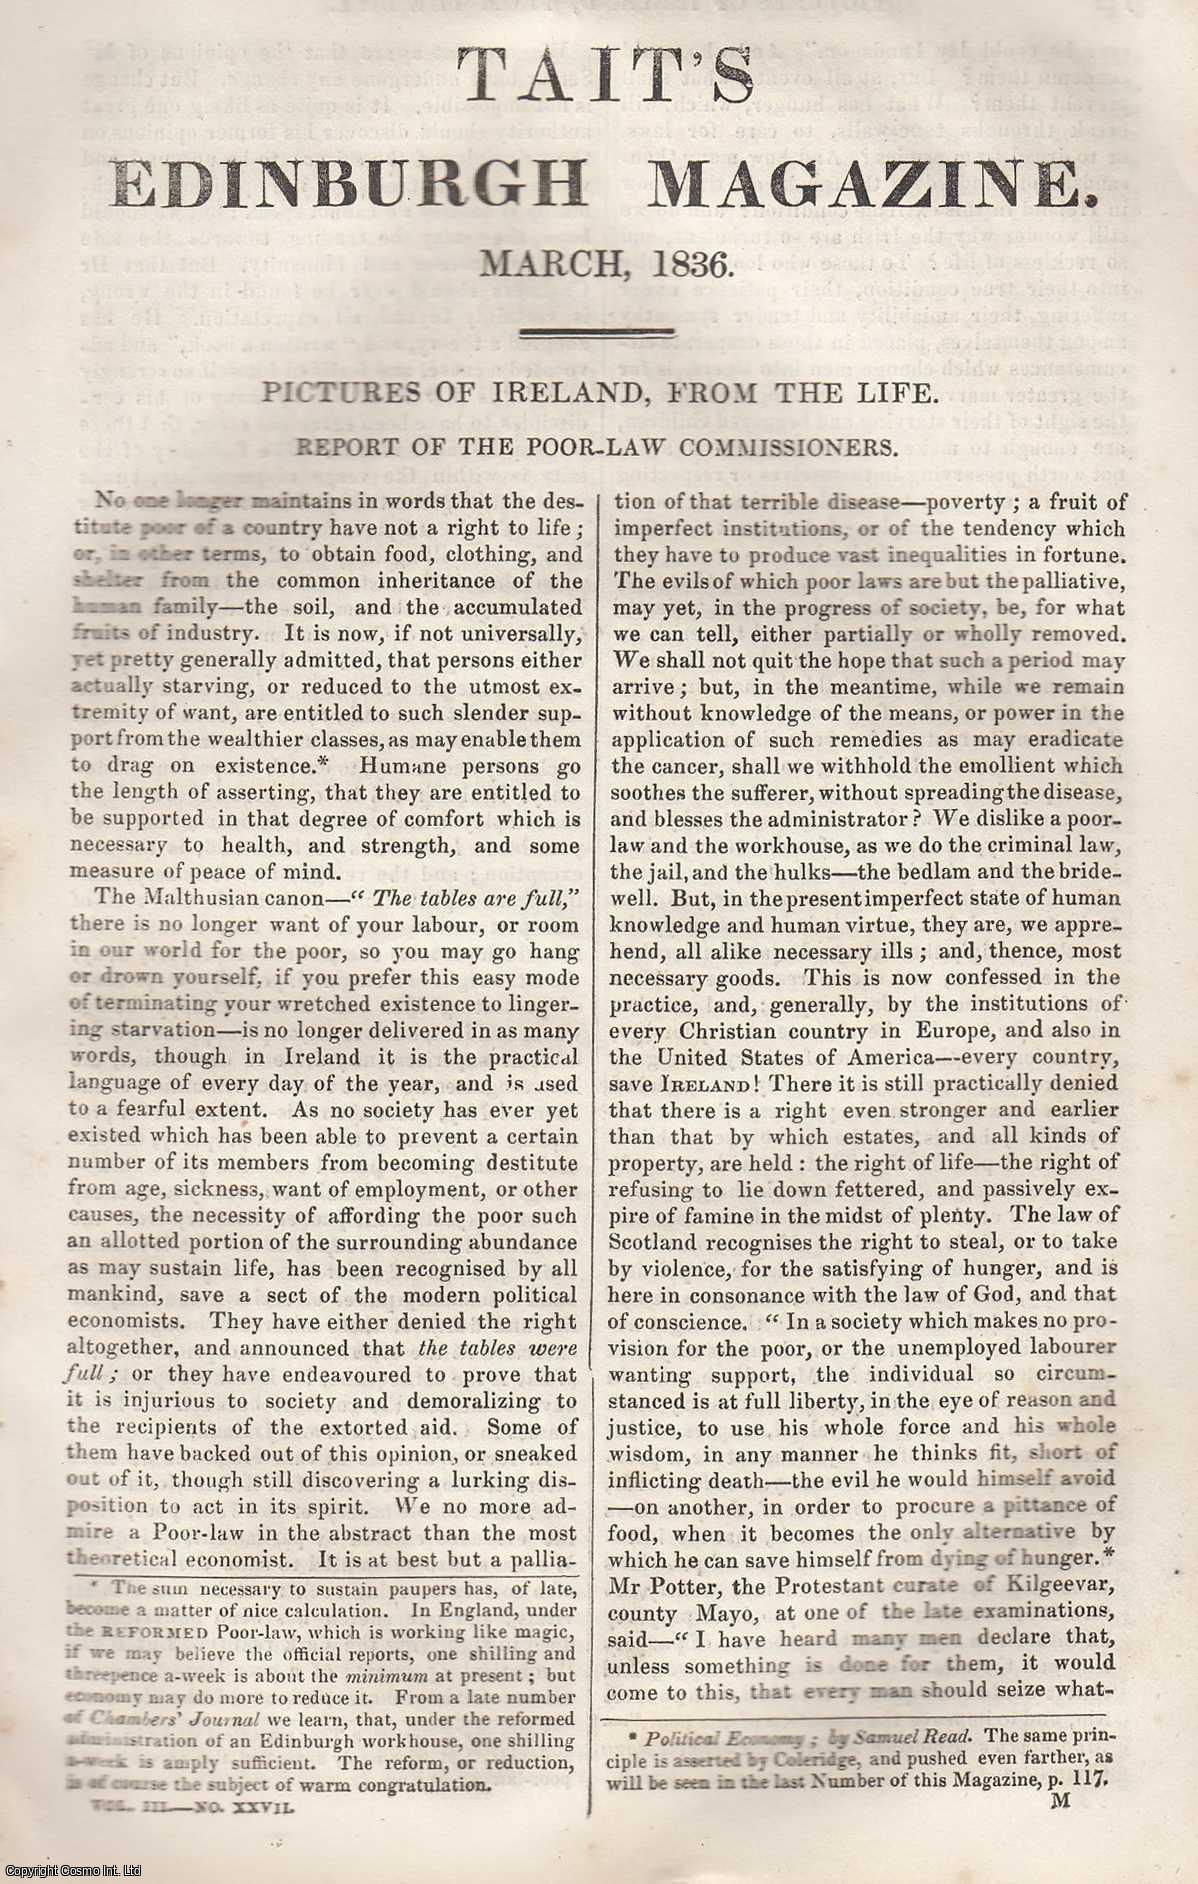 Johnstone, Christian - Pictures of Ireland, From The Life: Report of The Poor-Law Commissioners. An original article from Tait's Edinburgh Magazine, 1836.